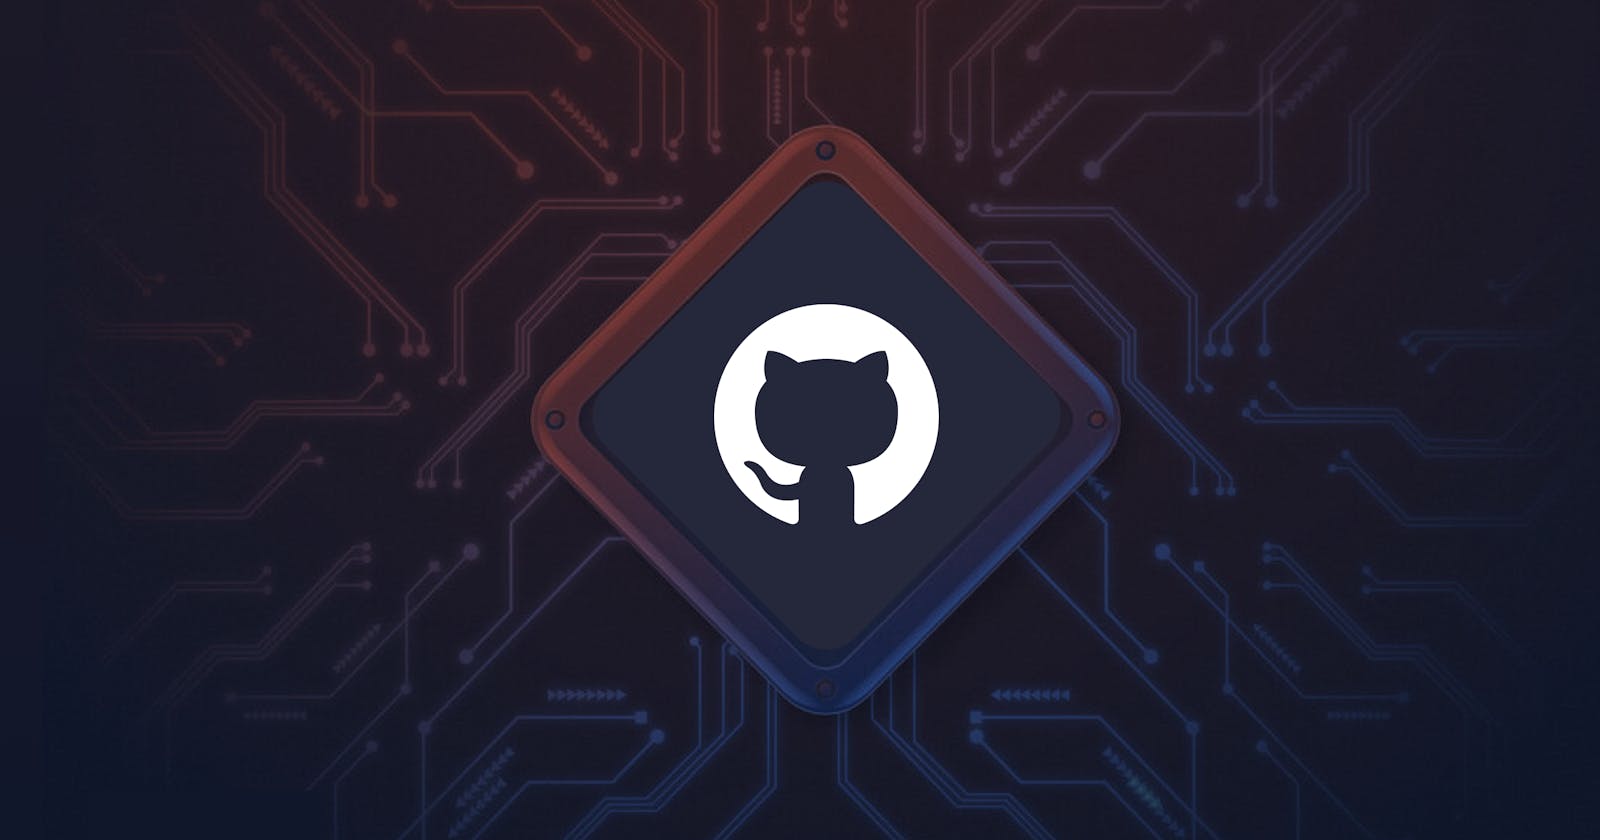 Popular GitHub repositories Every Developer Should Follow